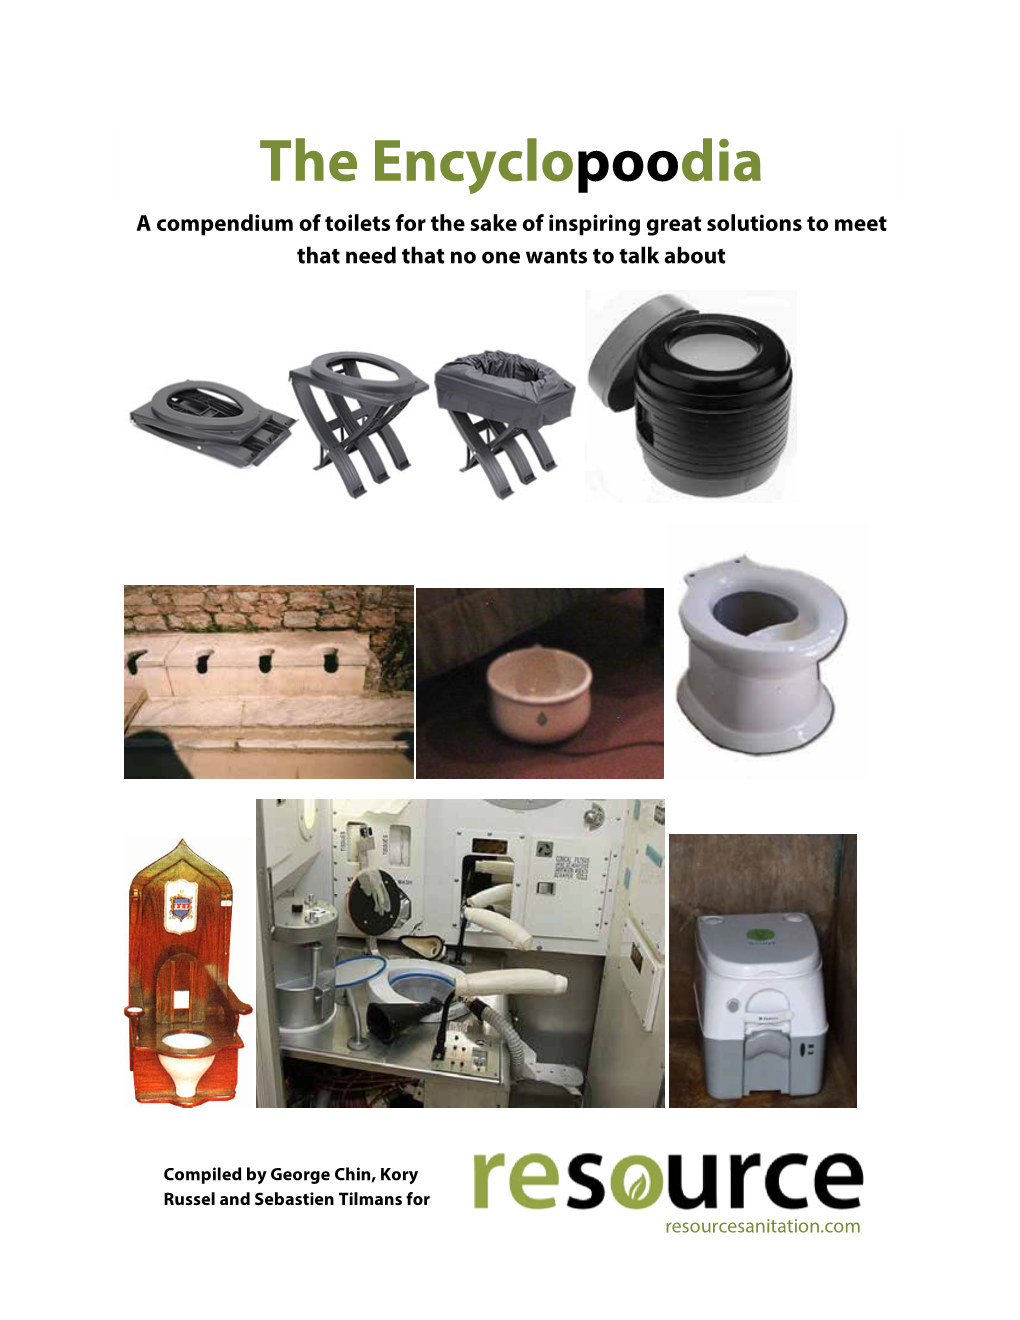 The Encyclopoodia a Compendium of Toilets for the Sake of Inspiring Great Solutions to Meet That Need That No One Wants to Talk About